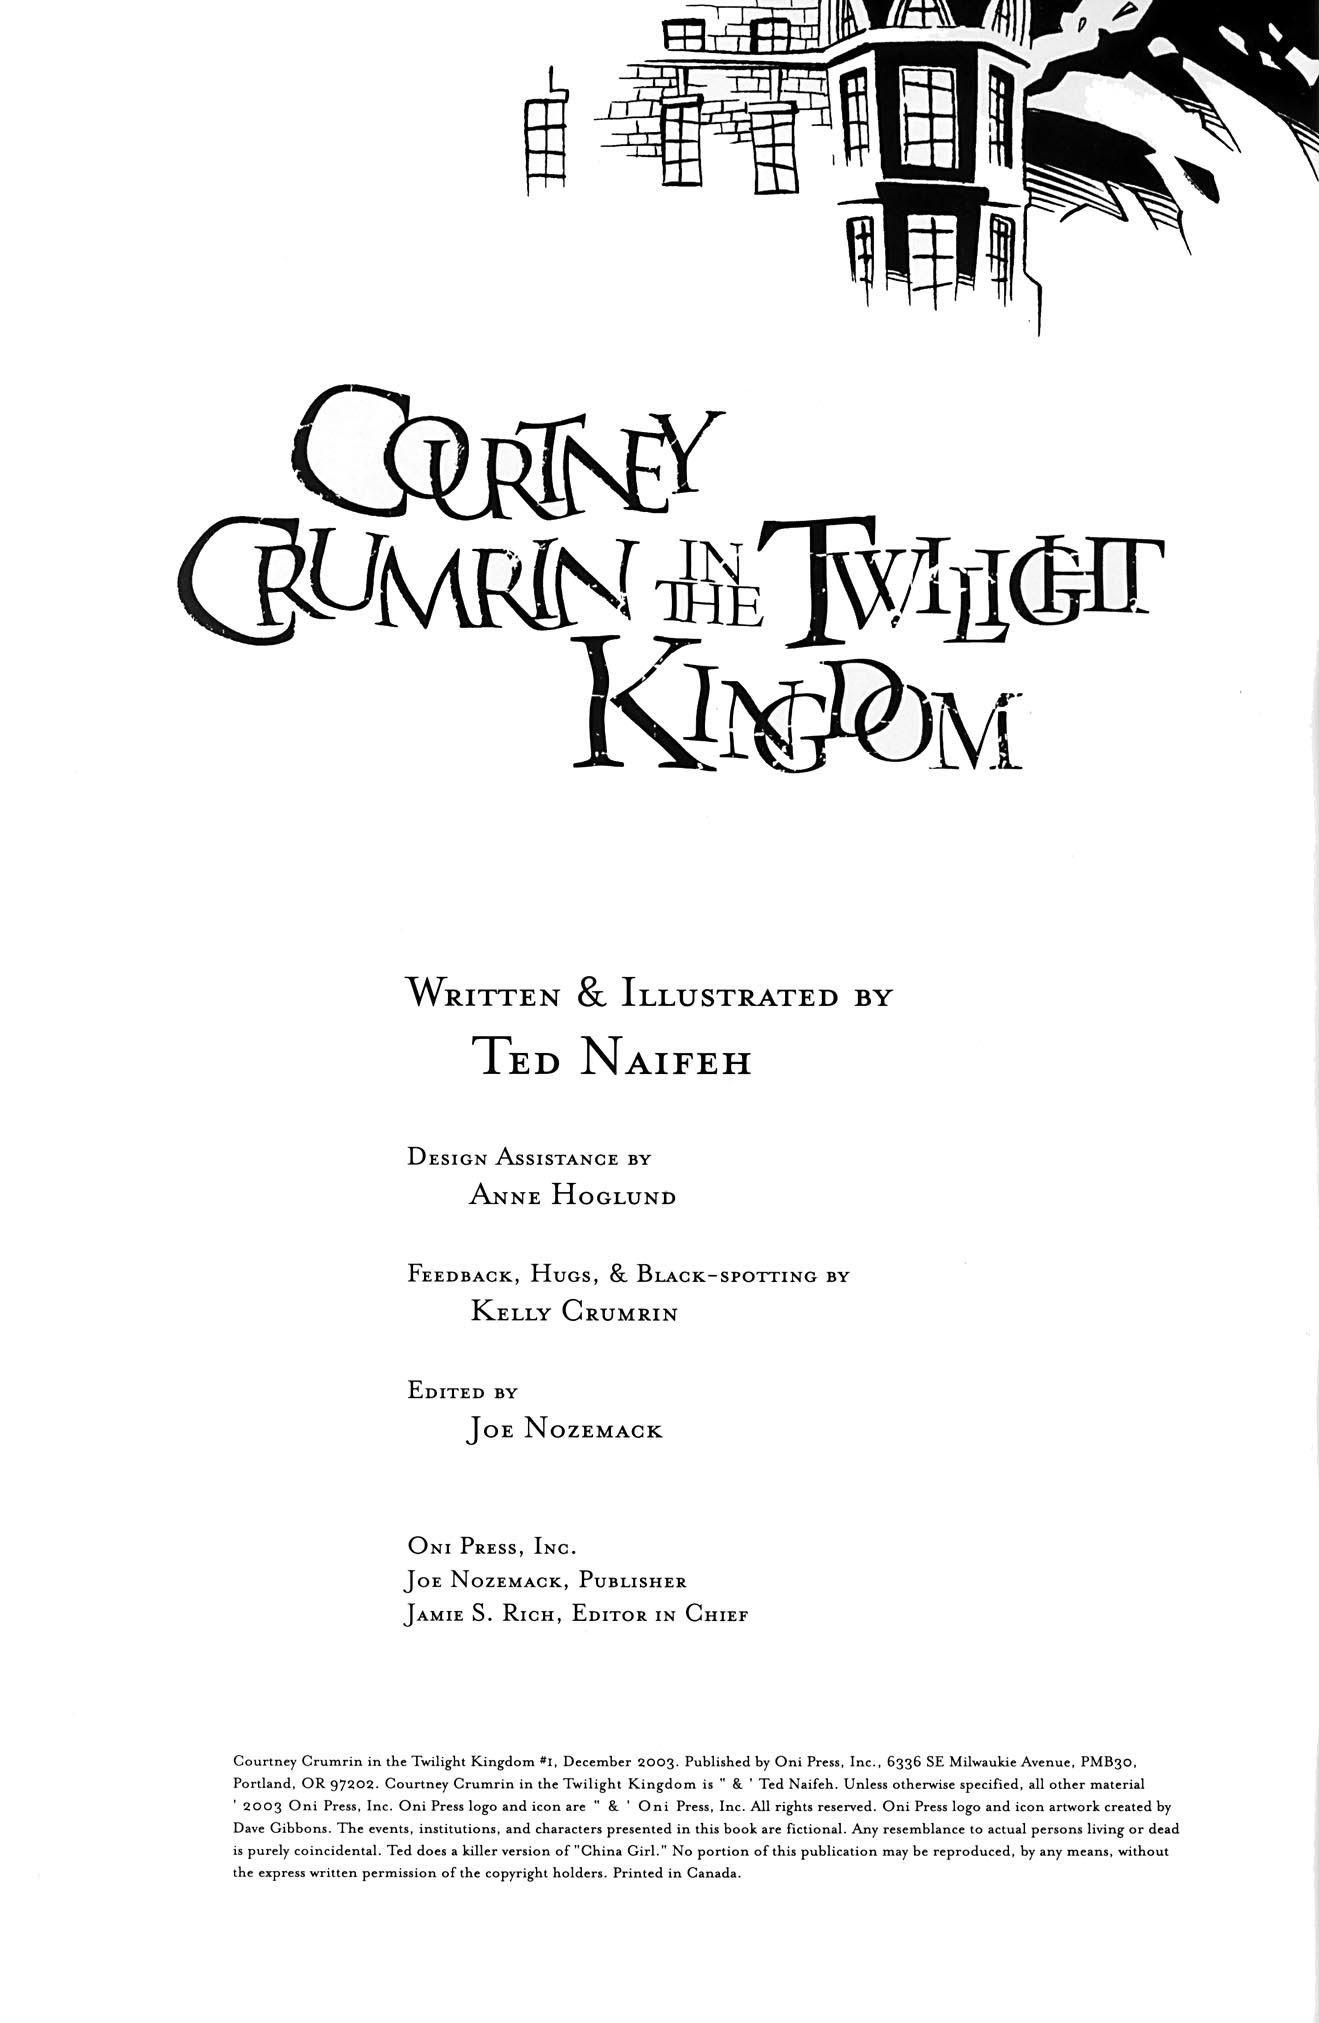 Read online Courtney Crumrin and the Twilight Kingdom comic -  Issue #1 - 2